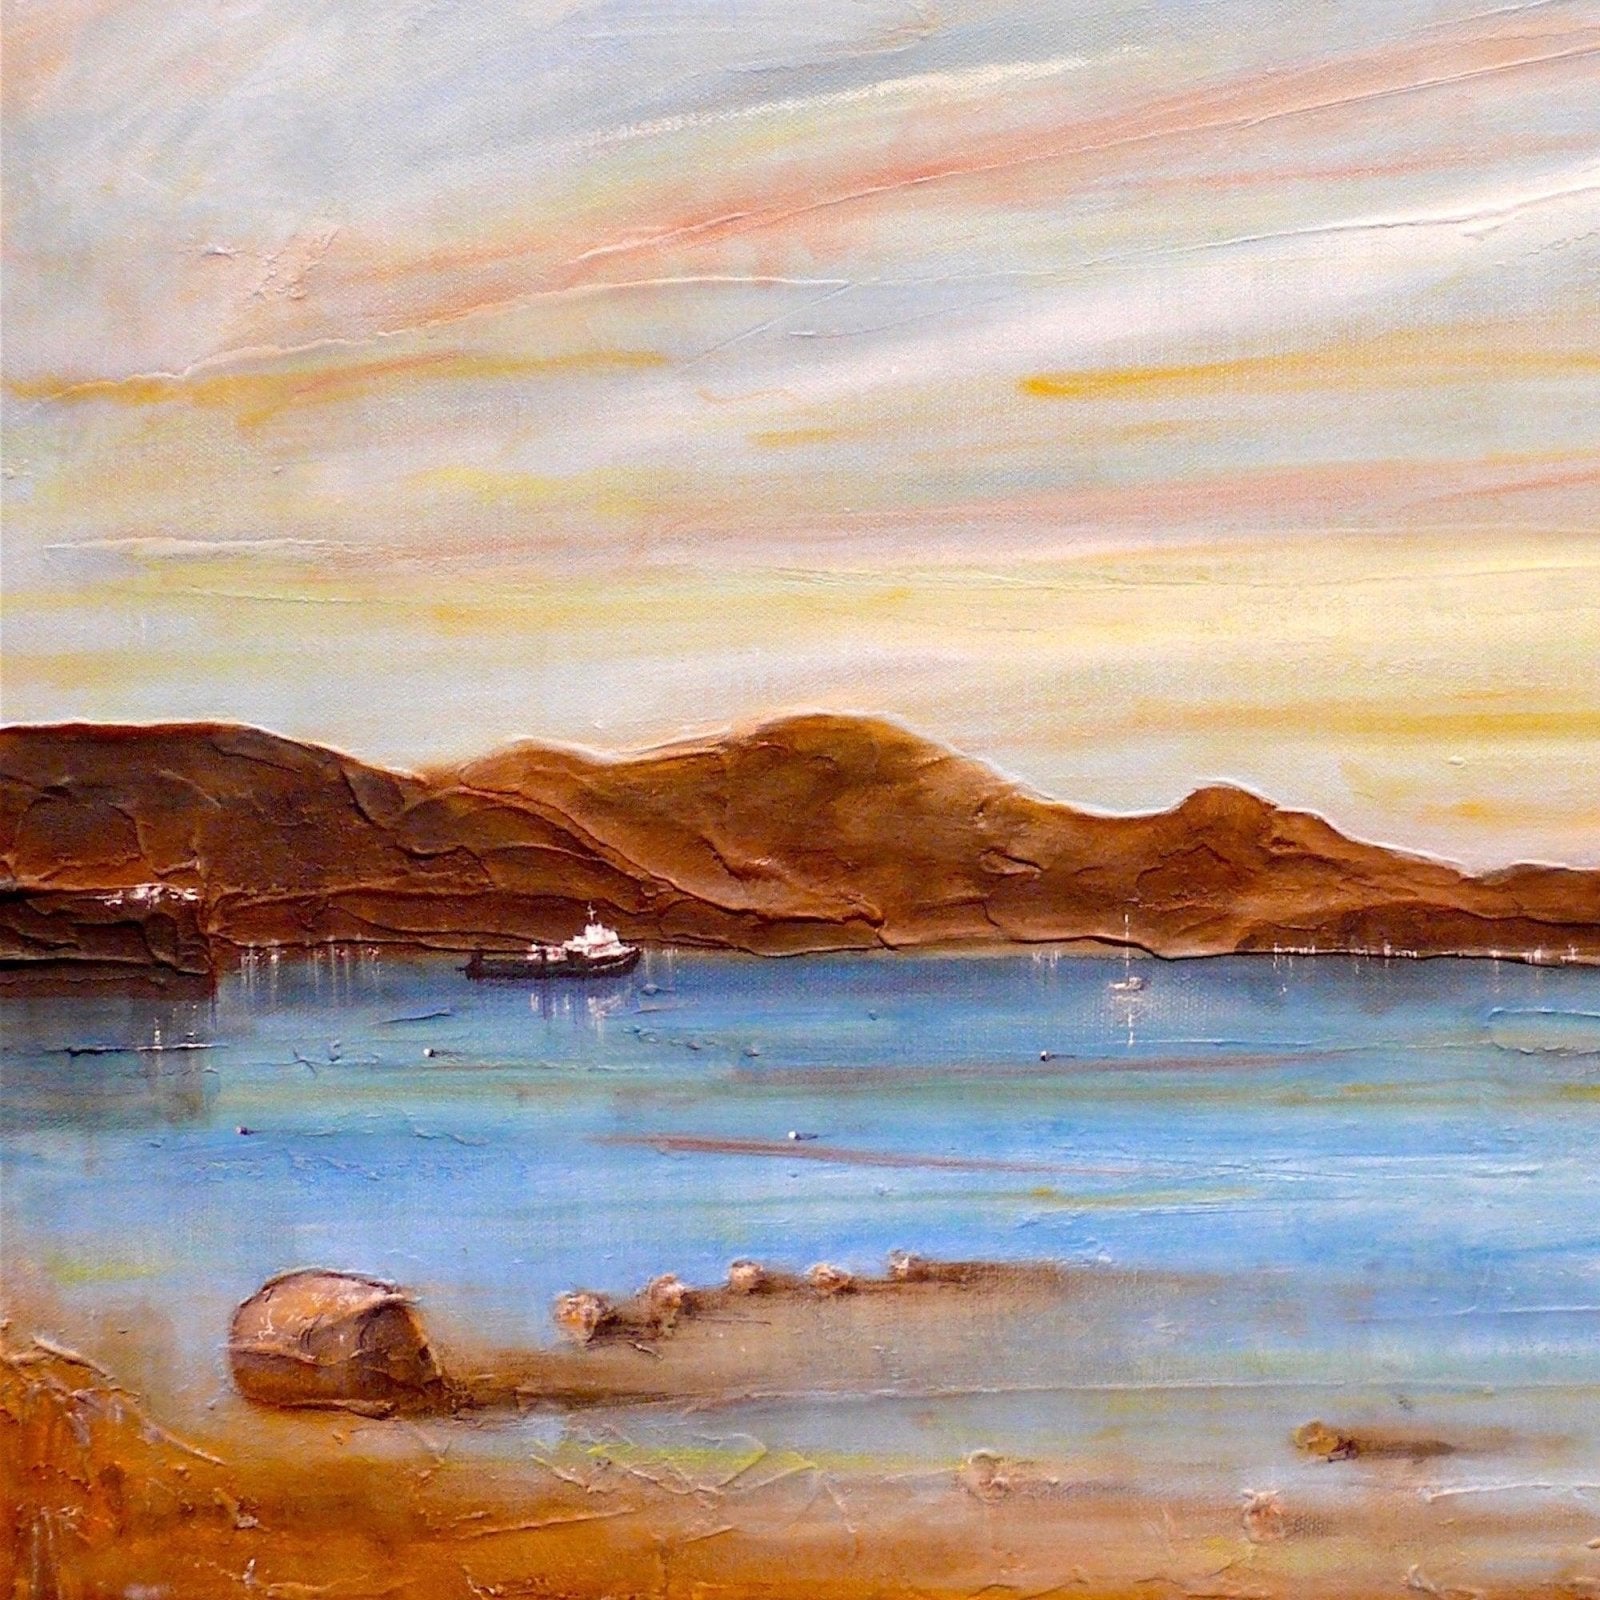 The Last Ferry To Dunoon Wooden Art Block-Wooden Art Blocks-River Clyde Art Gallery-Paintings, Prints, Homeware, Art Gifts From Scotland By Scottish Artist Kevin Hunter